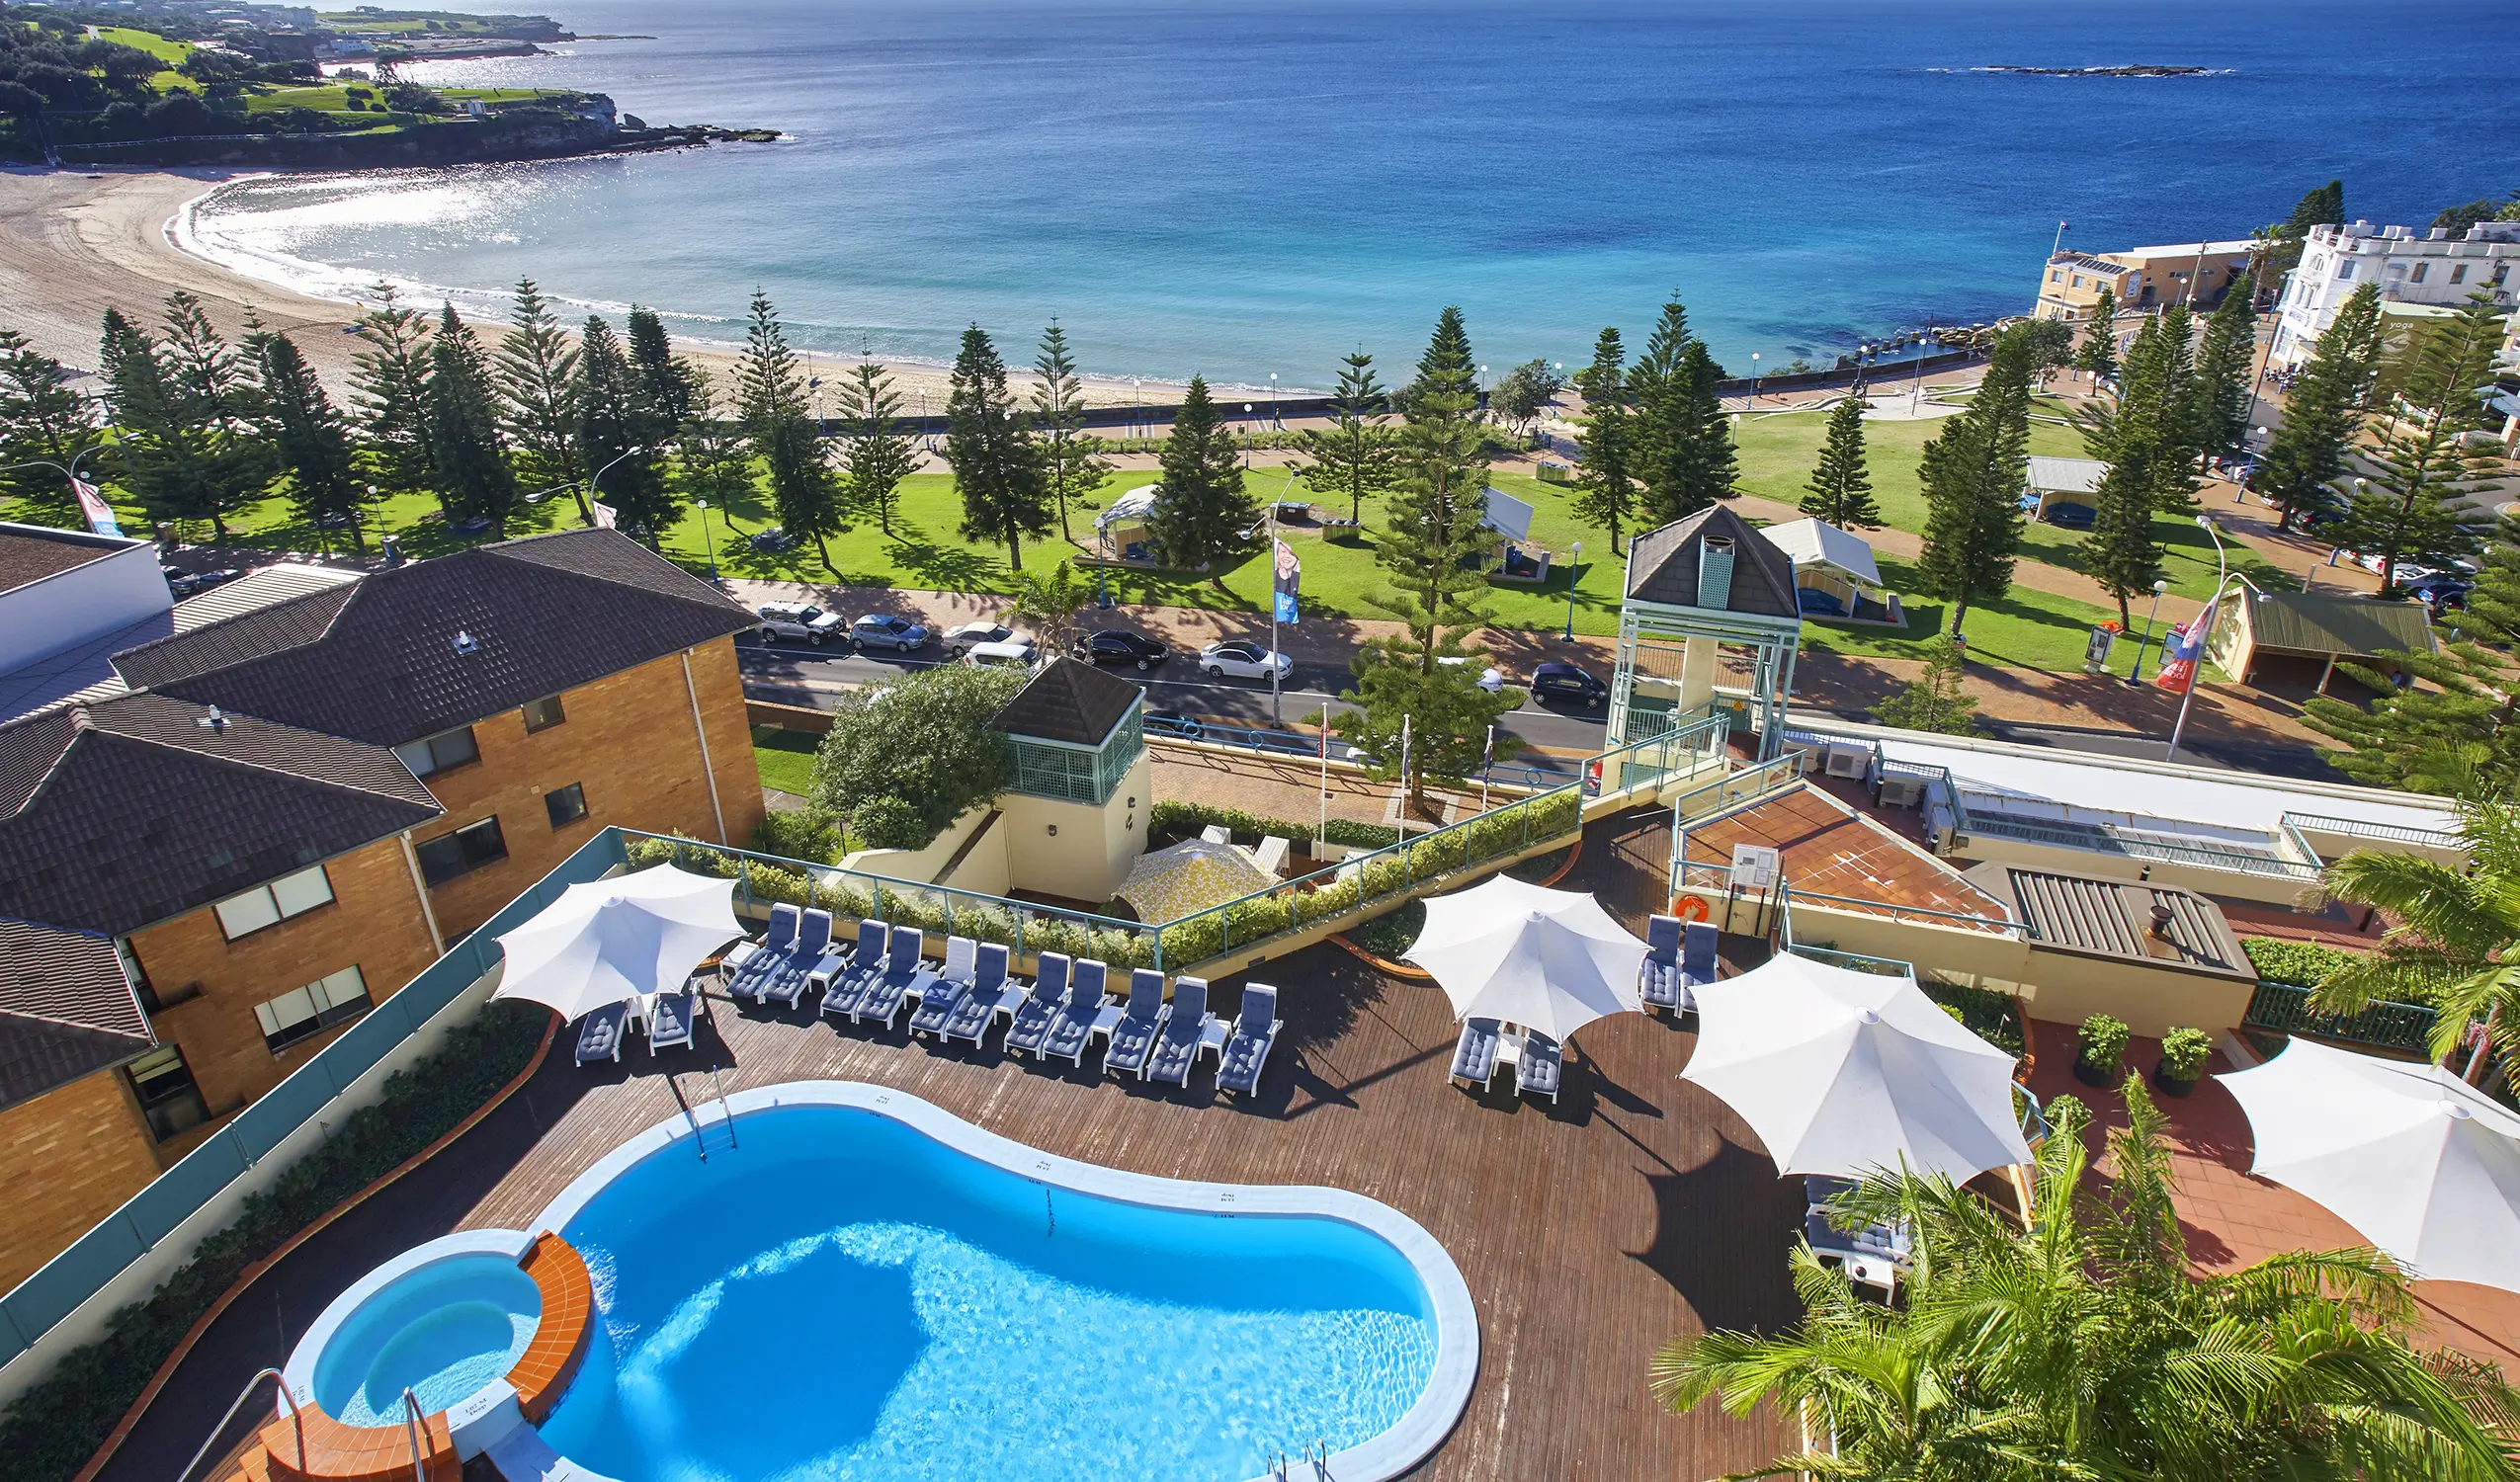 Birds-Eye-View-of-pool-deck-at-Crowne-Plaza-Sydney-Coogee-Beach